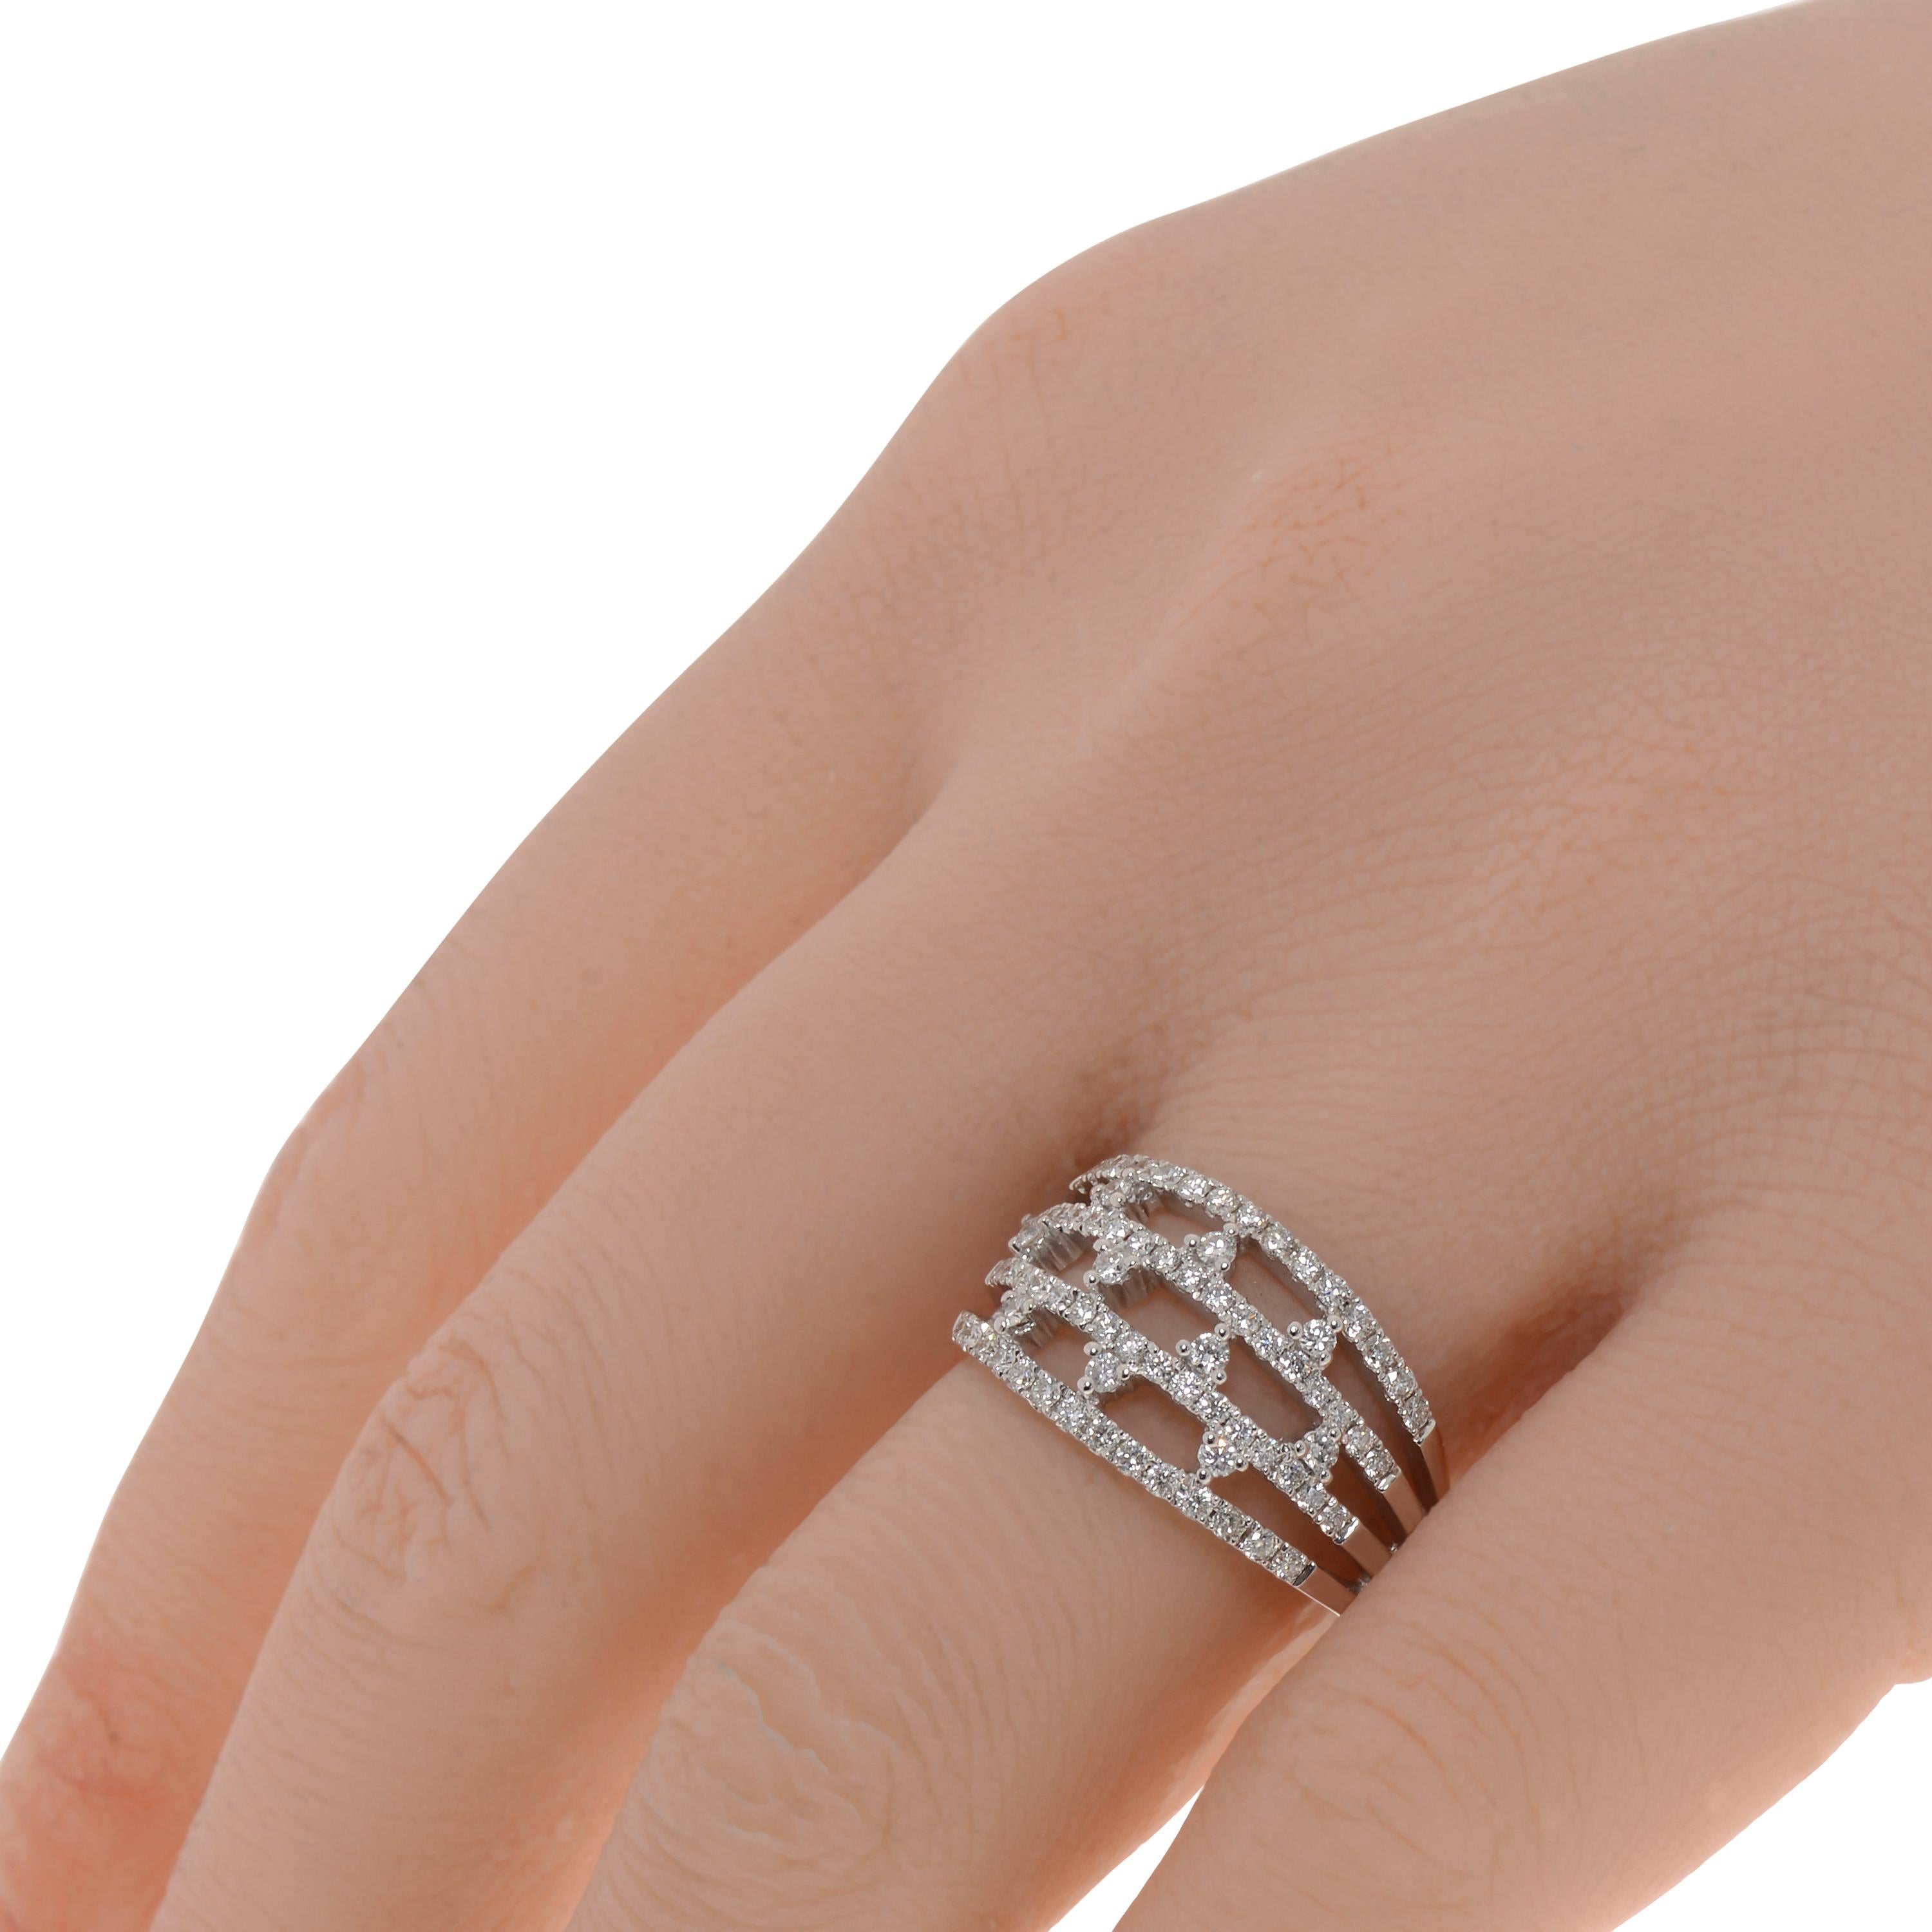 This gorgeous Piero Milano 18K White Gold Band Ring features four layers of glittering pave diamonds detailed with shining centers of prong set diamonds 0.71ct. tw. The ring size is 6.5 (53.1). The Band Width is 11.5mm. The Weight is 5.8g.
